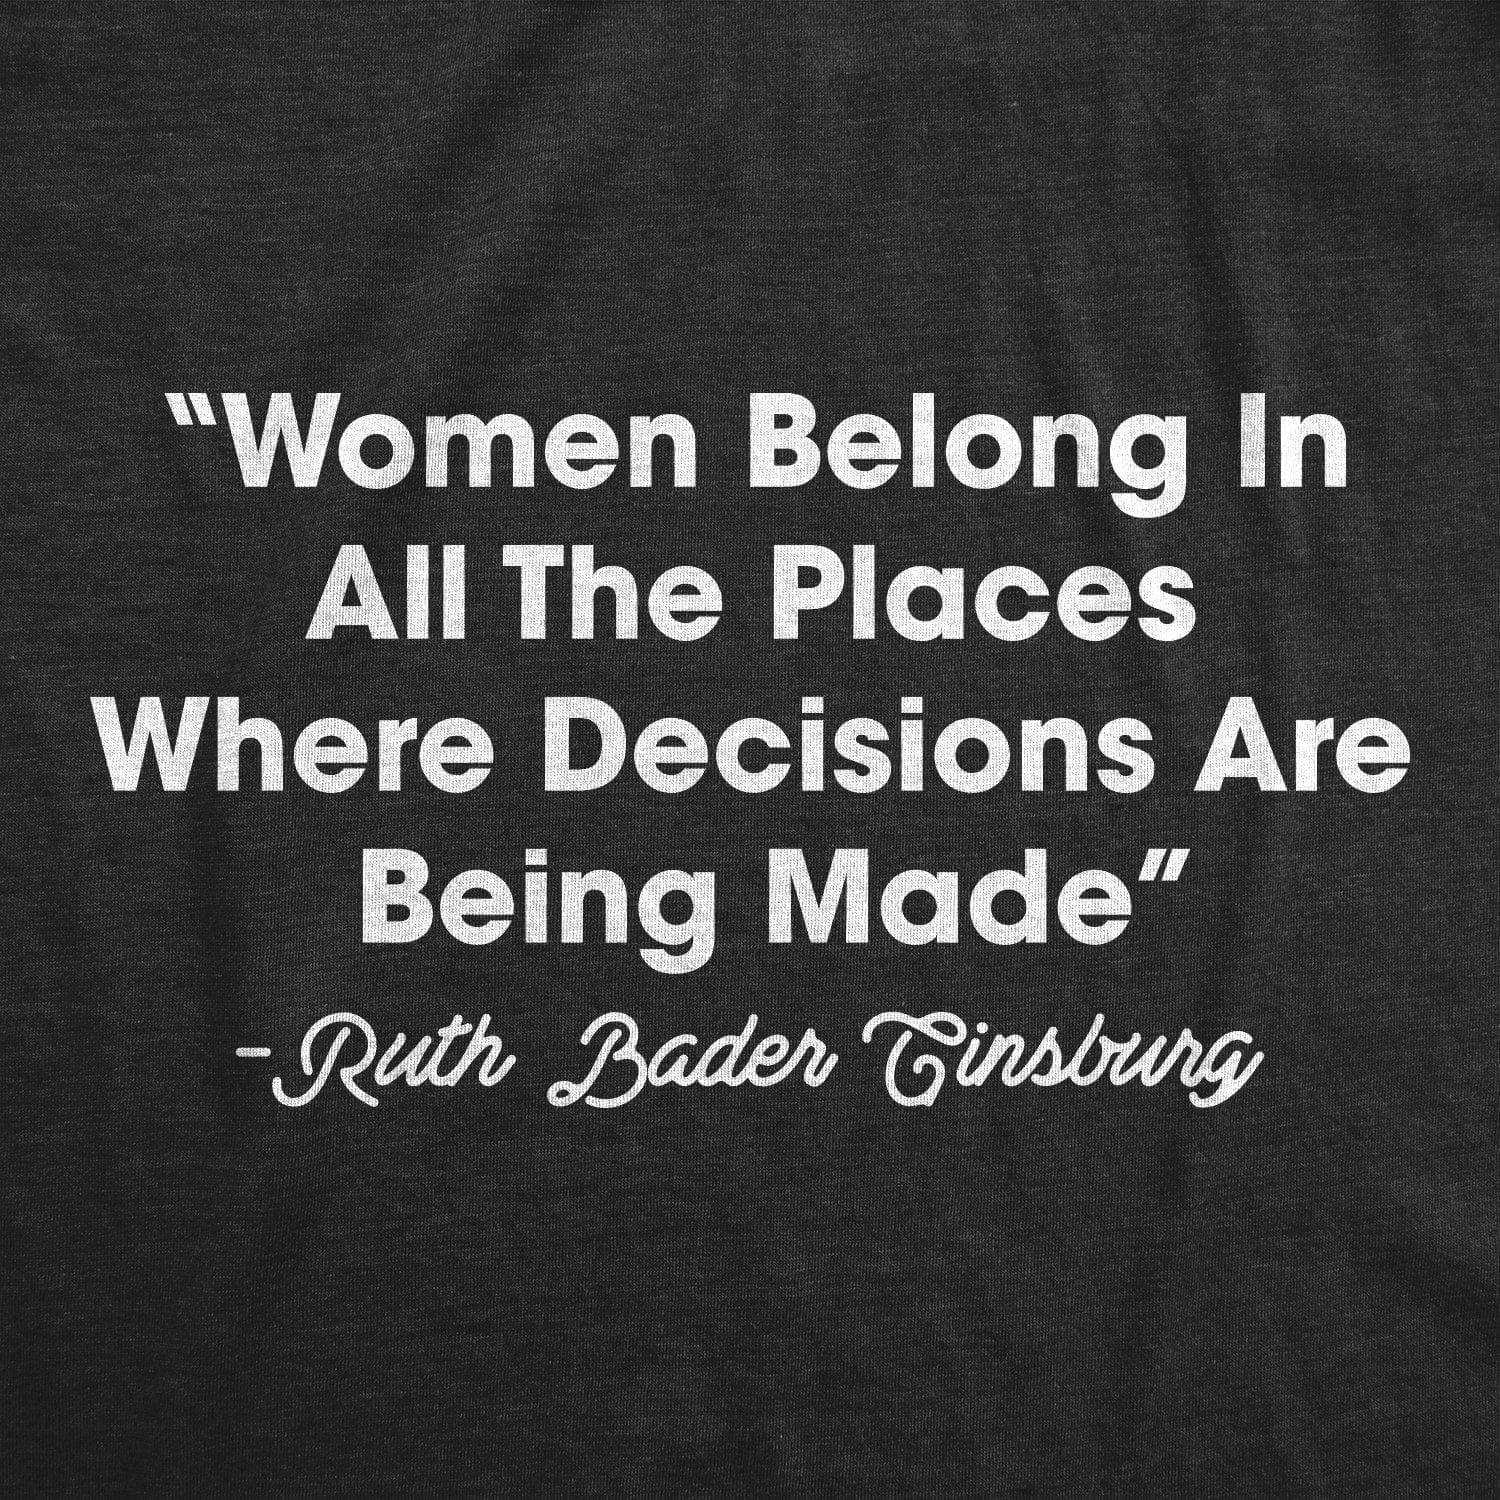 Women Belong In All The Places Where Decisions Are Made Women's Tshirt - Crazy Dog T-Shirts